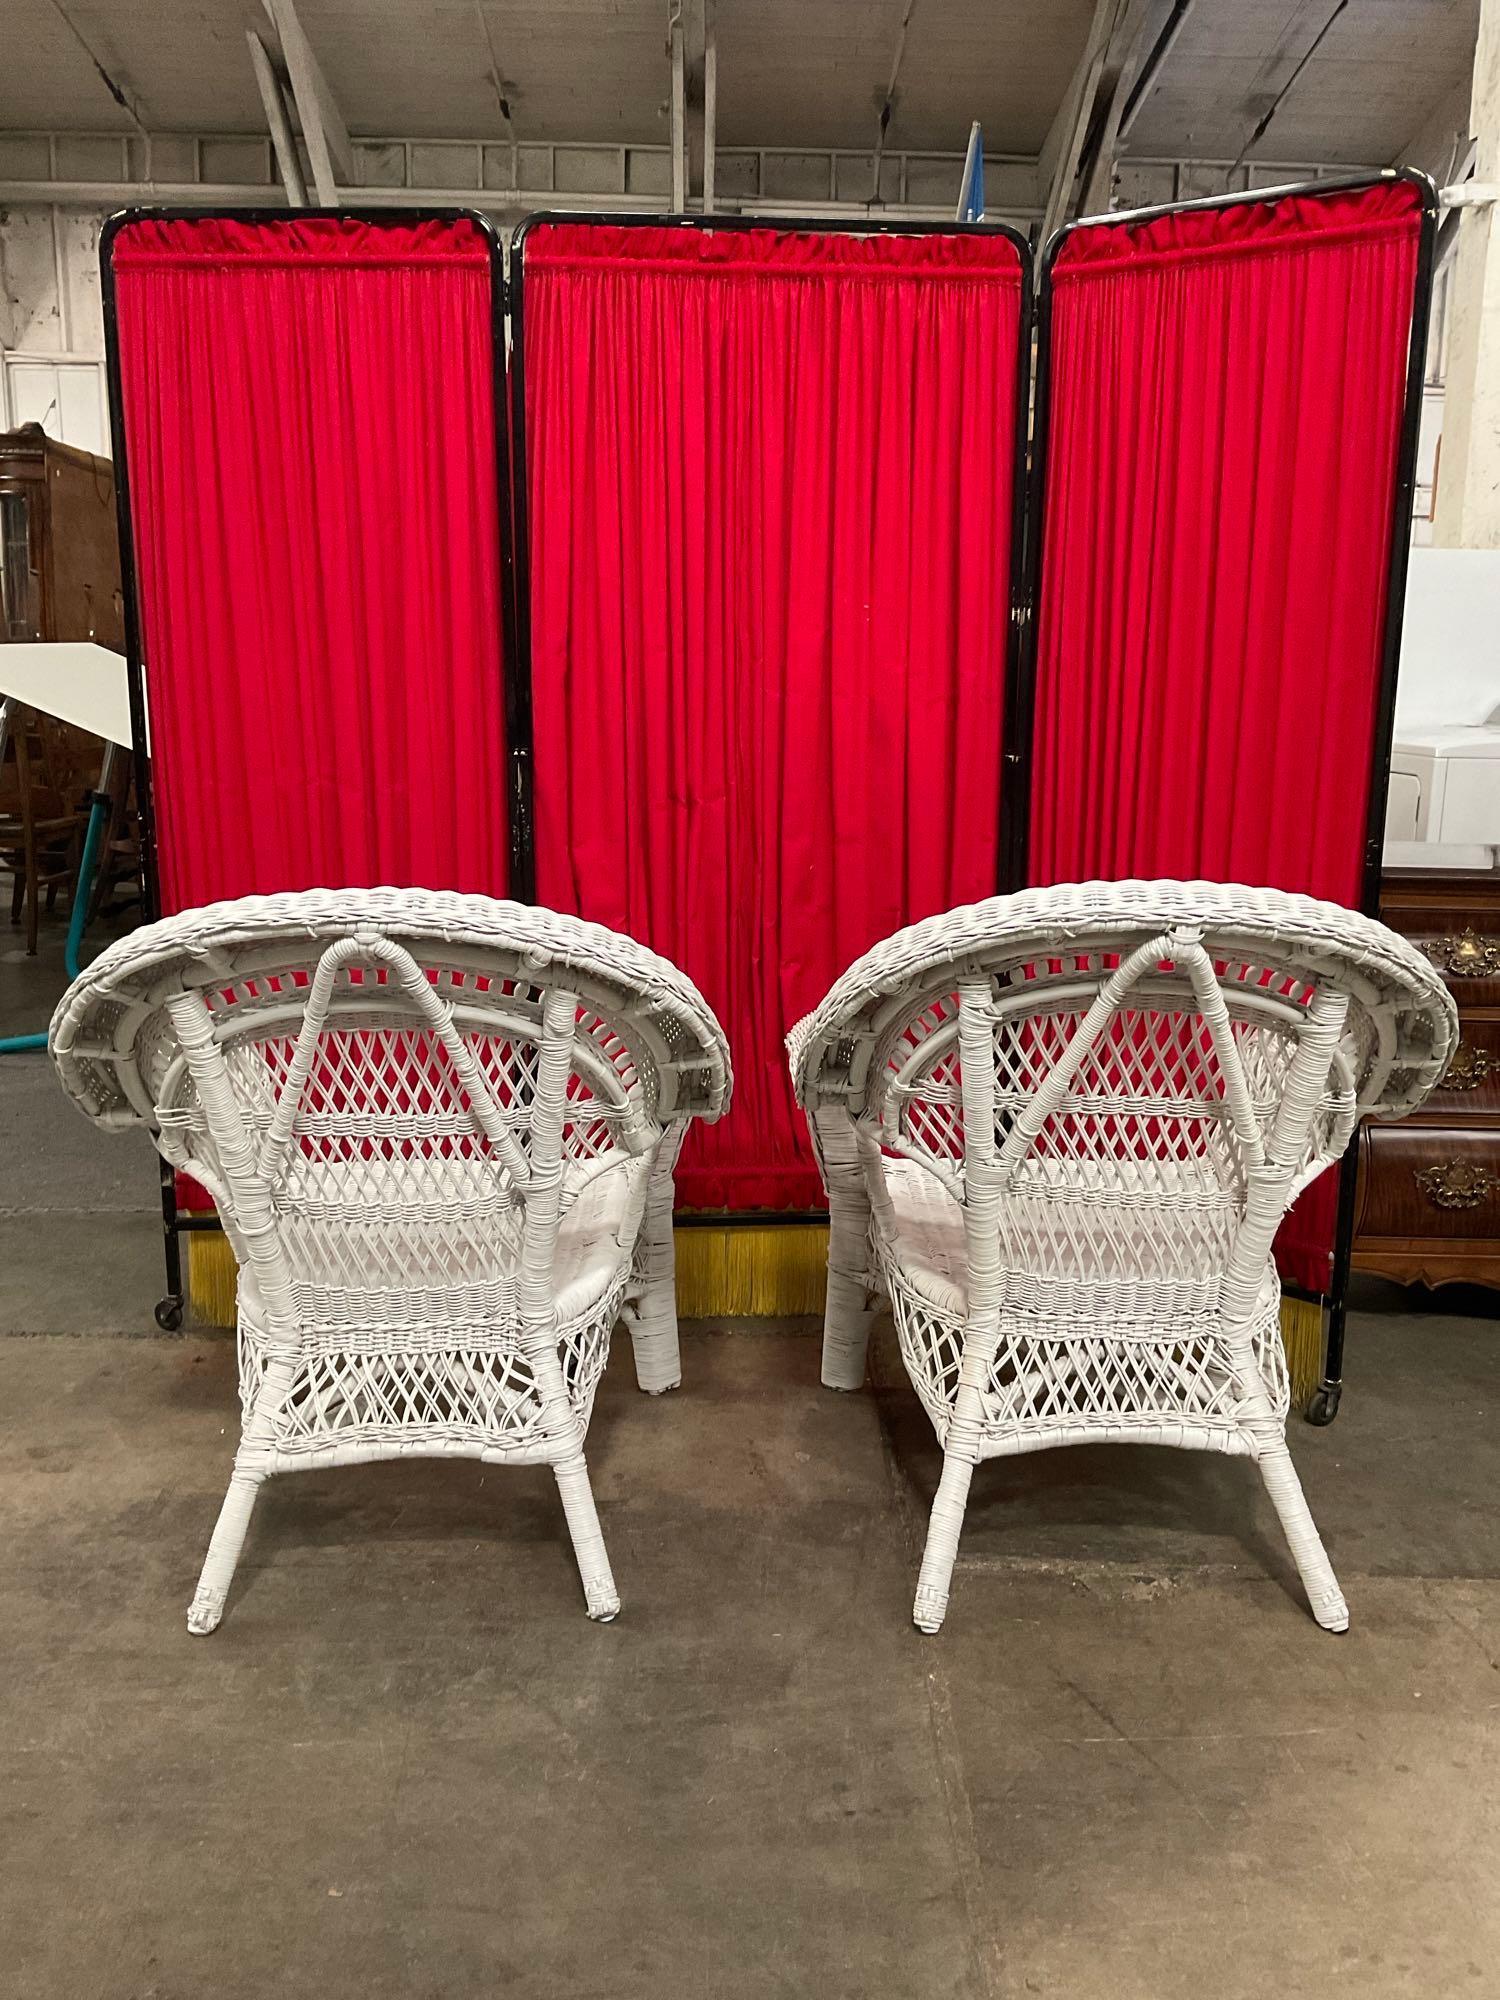 Pair of Vintage White Painted Wicker Patio Armchairs w/ Bead Accents. Measures 30" x 35" See pics.